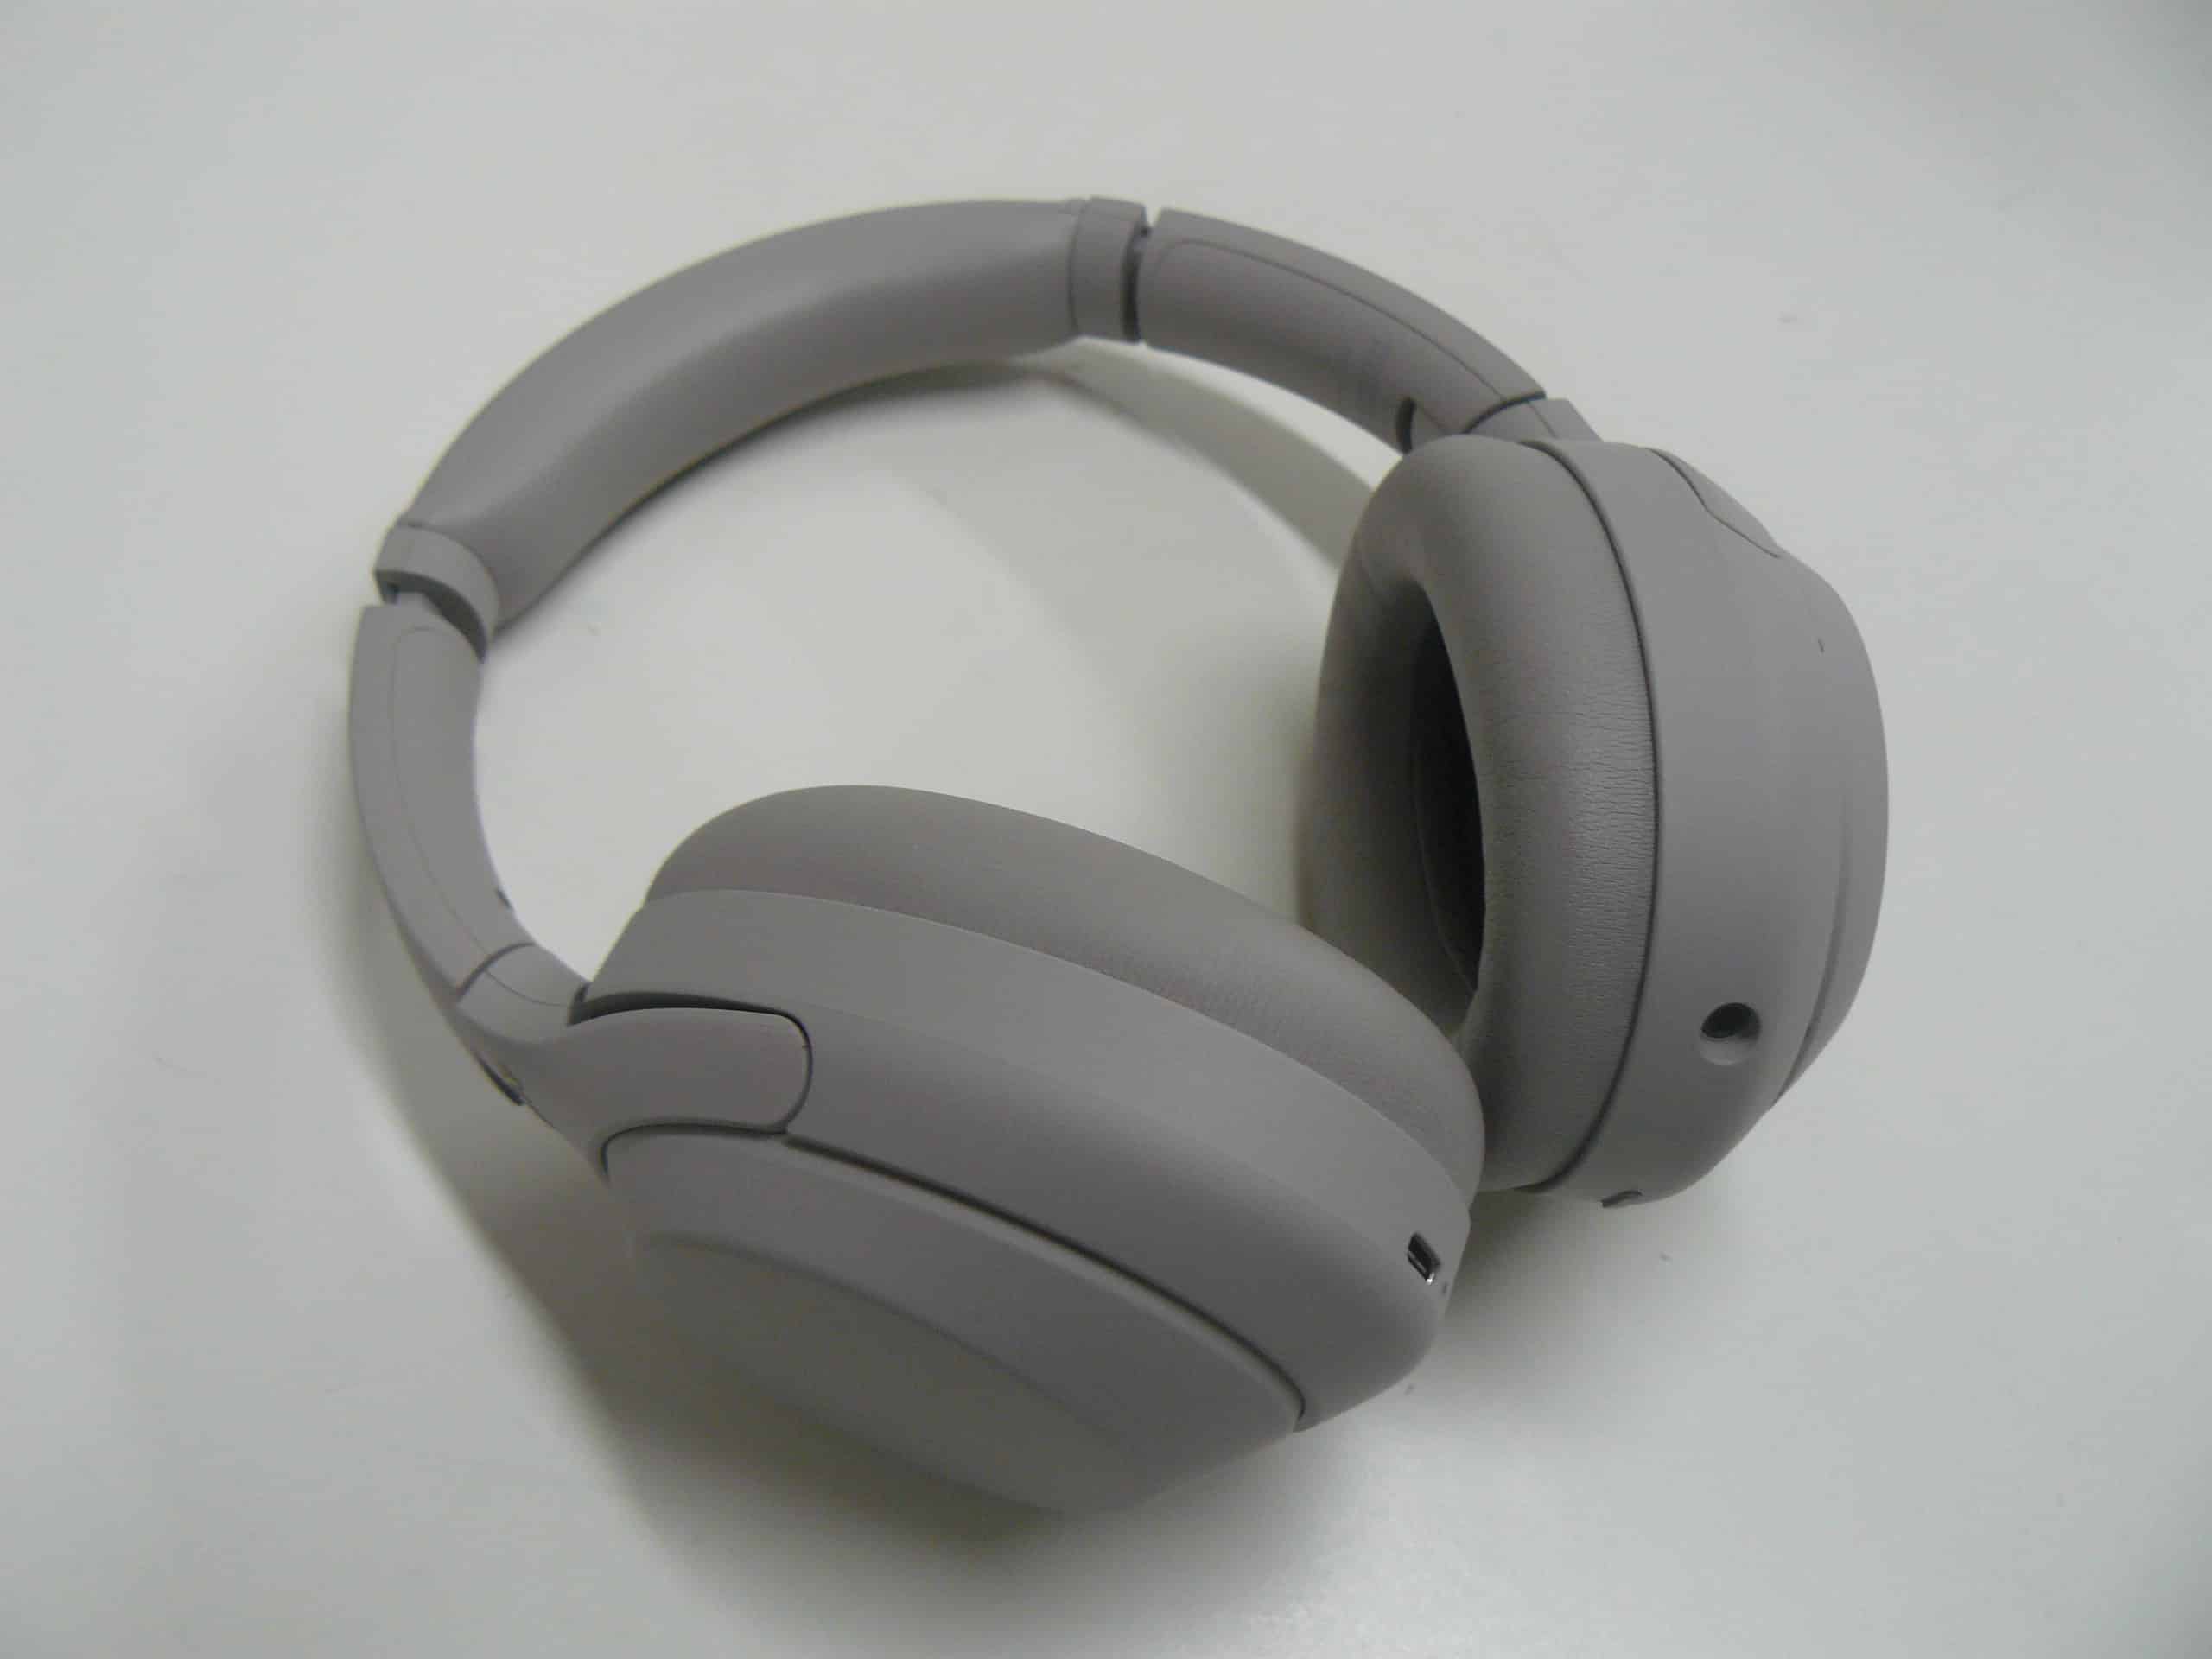 Sony WH-1000XM4 Wireless Noise Canceling Headphones Review